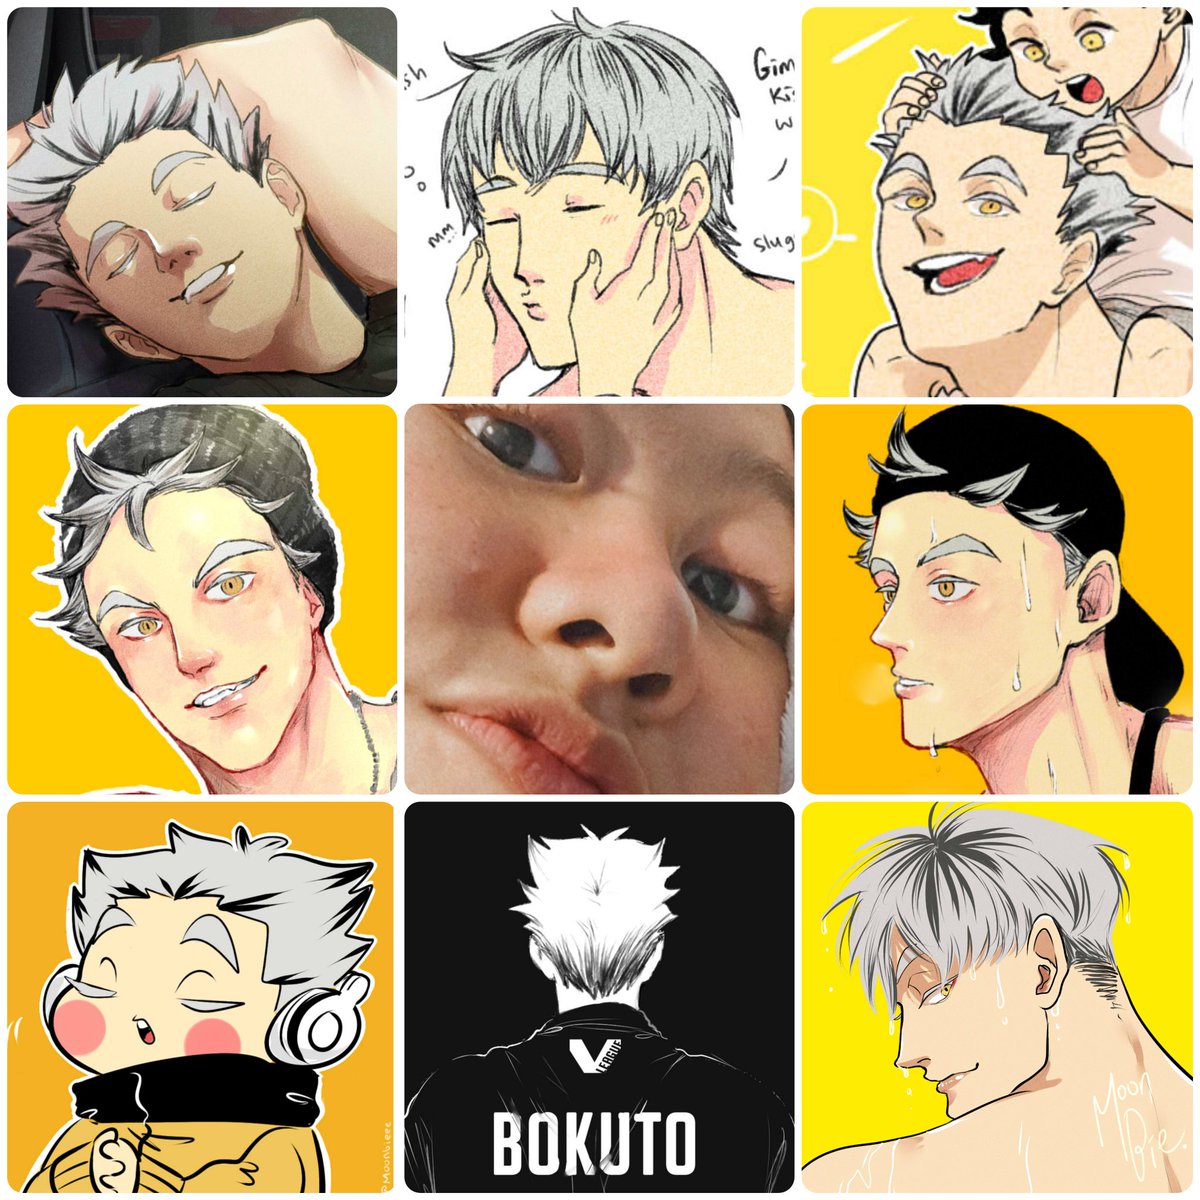 I don't have any new art today ?
Still recovering from my burnout ?
So here's a pic of me and some of my Bokuto arts I like the most 